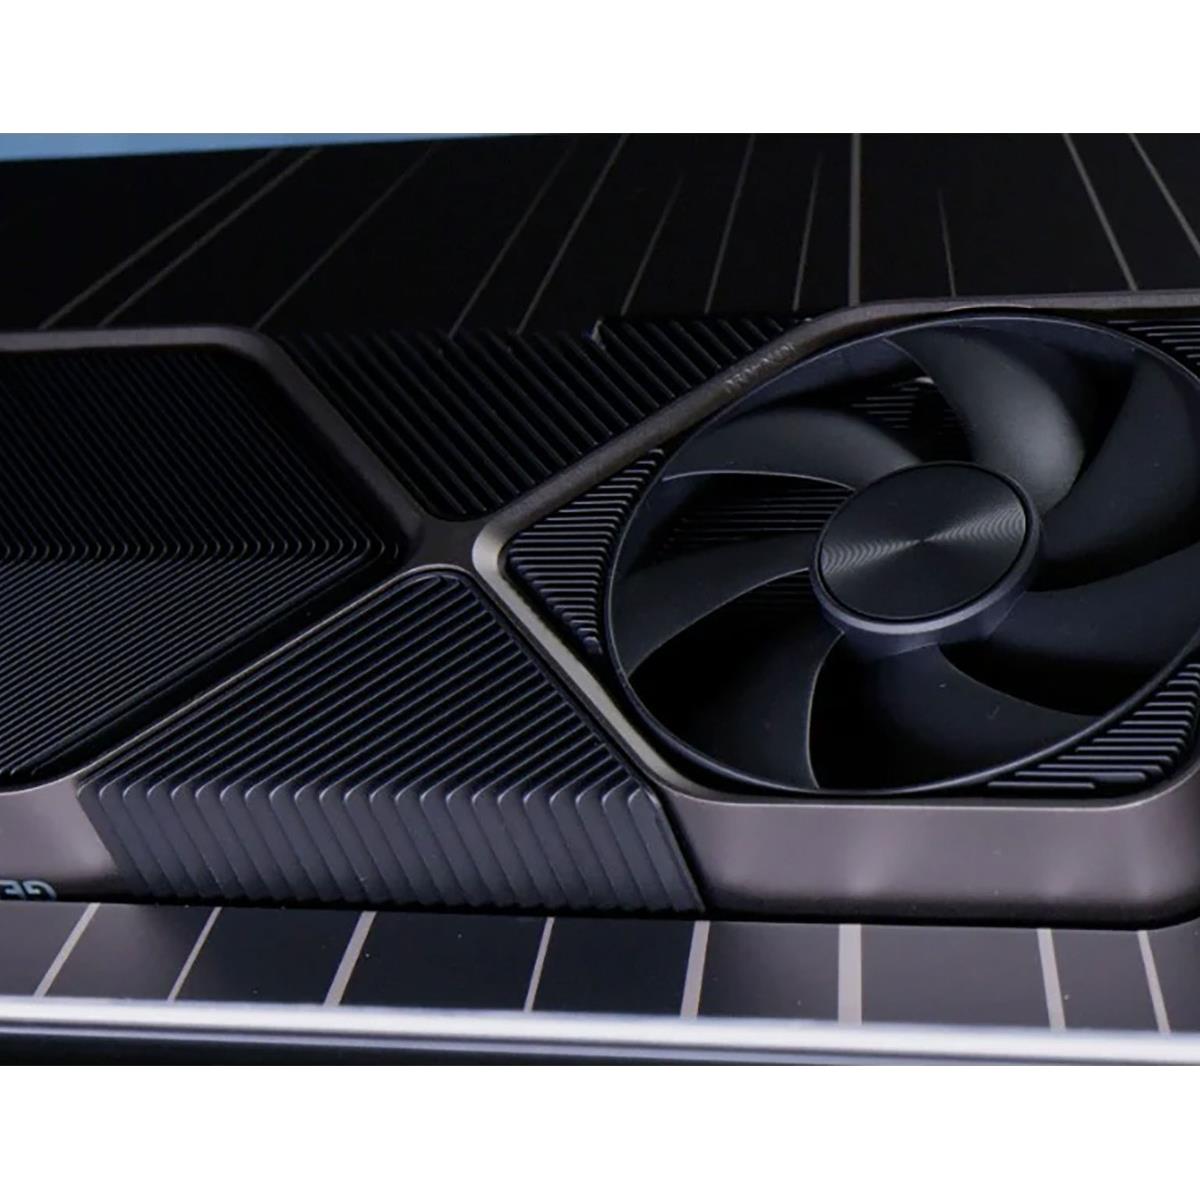 NVIDIA GeForce RTX 4080 SUPER rumored to have same 320W power as